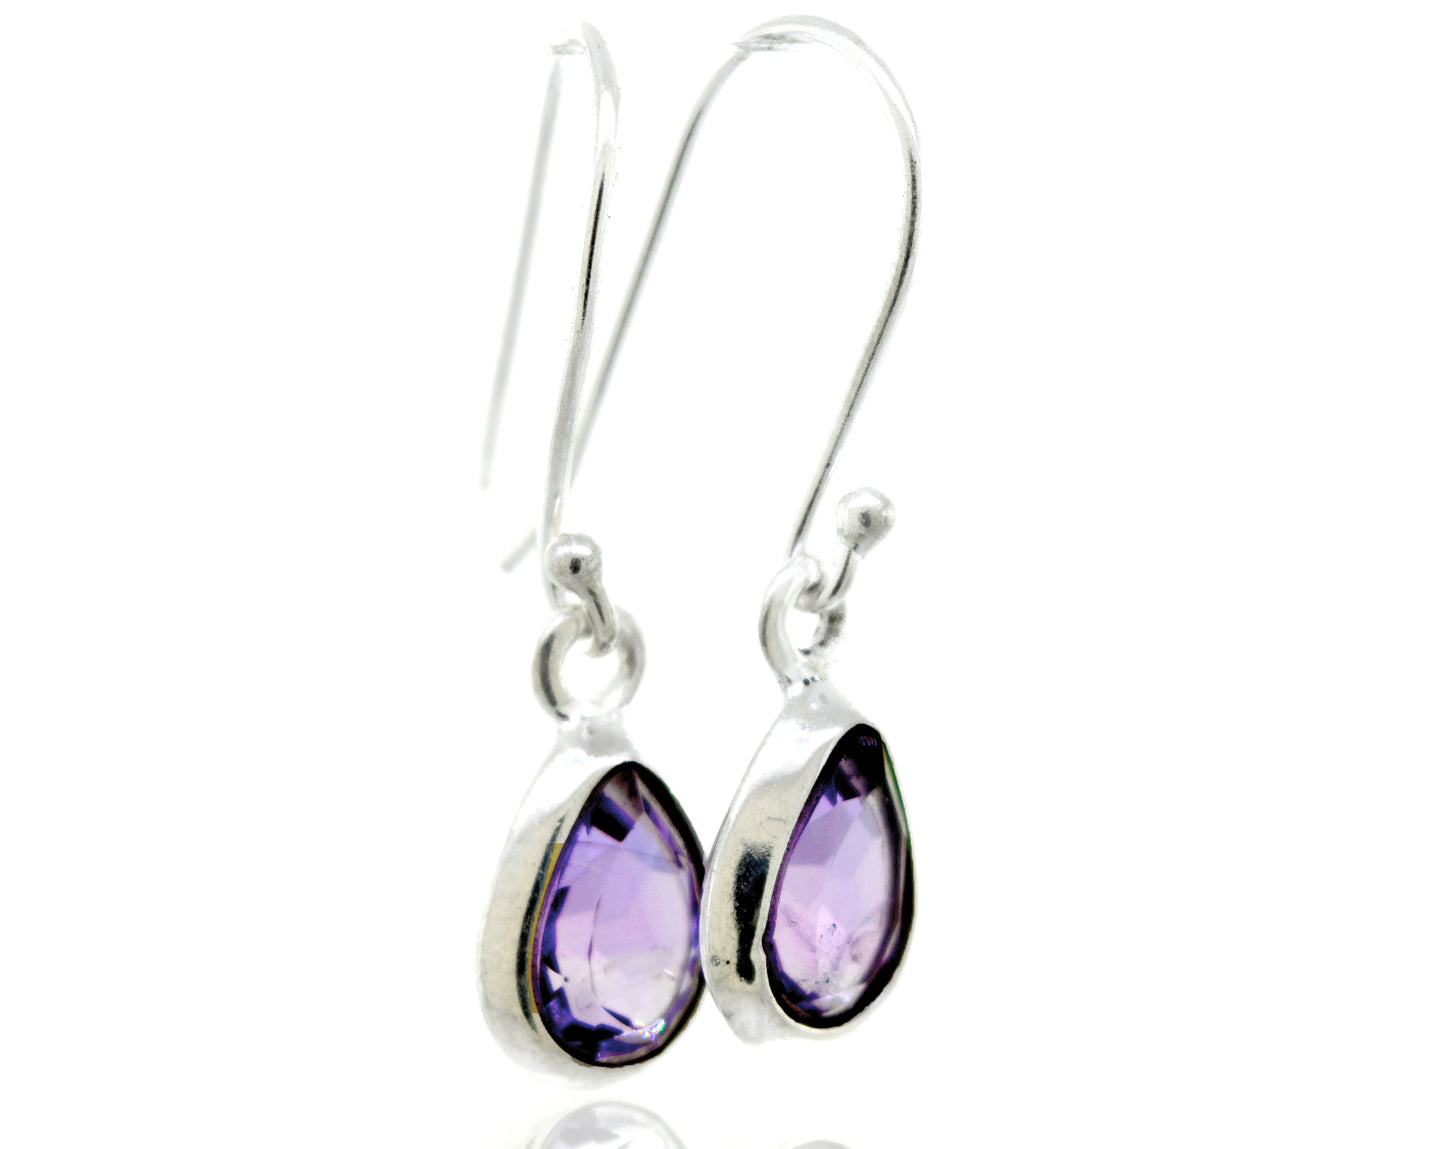 A stunning pair of Super Silver Simple Teardrop Shape Amethyst Earrings featuring a purple amethyst stone in a facet cut, set within a sterling silver setting.